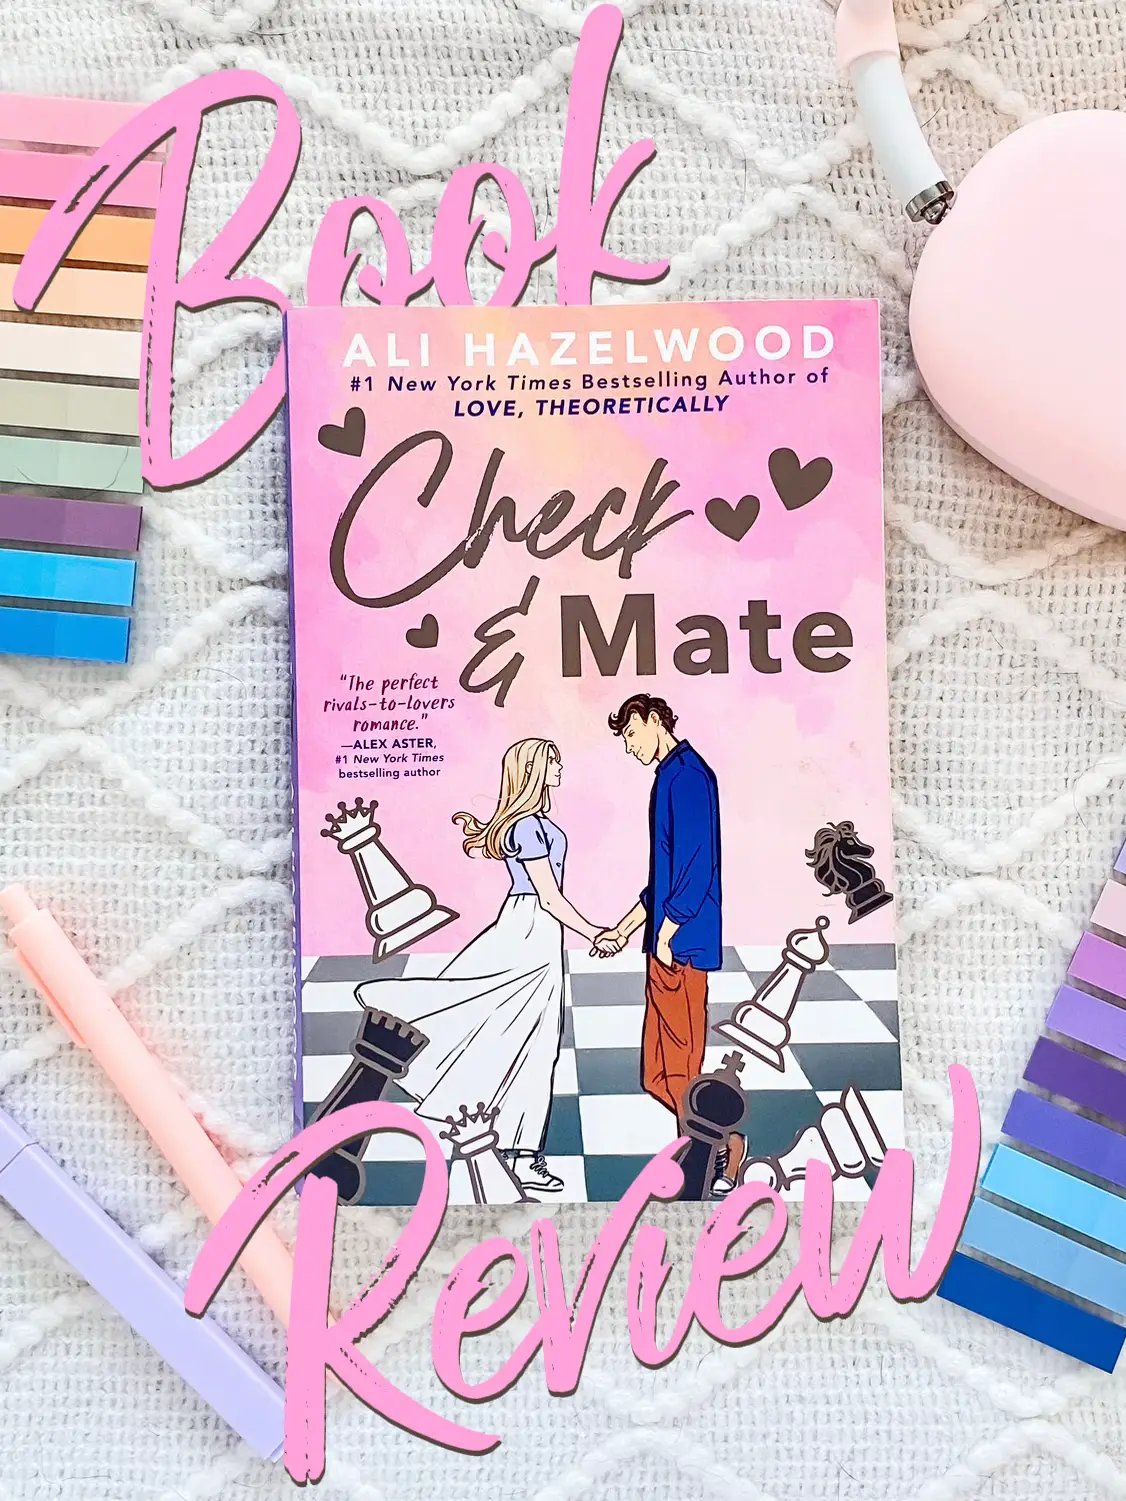 Check & Mate by Ali Hazelwood Book Review, by Teshail